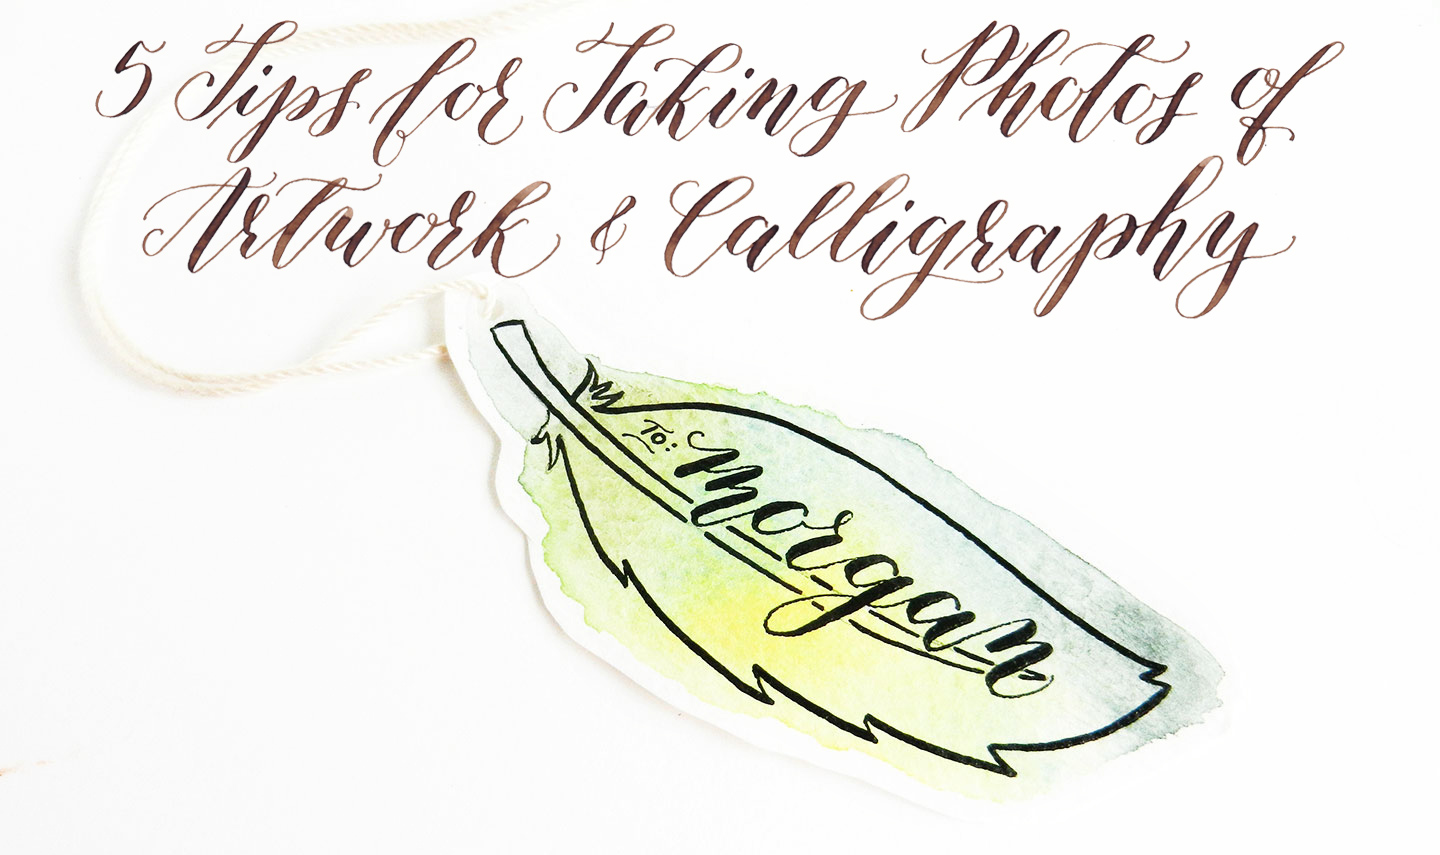 5 Tips for Taking Photos of Artwork and Calligraphy